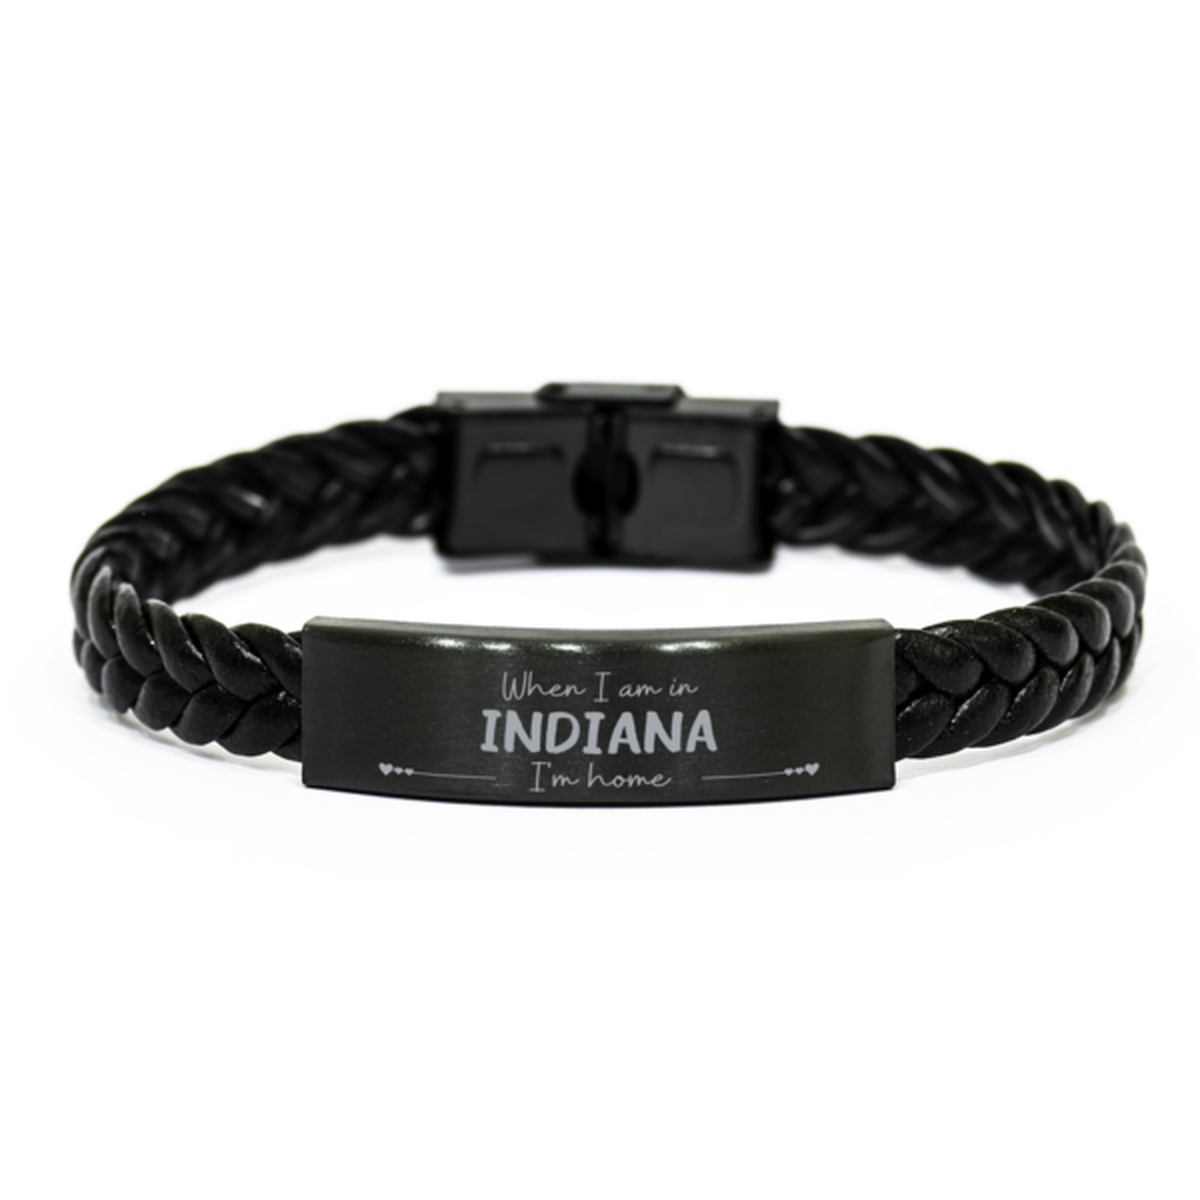 When I am in Indiana I'm home Braided Leather Bracelet, Cheap Gifts For Indiana, State Indiana Birthday Gifts for Friends Coworker